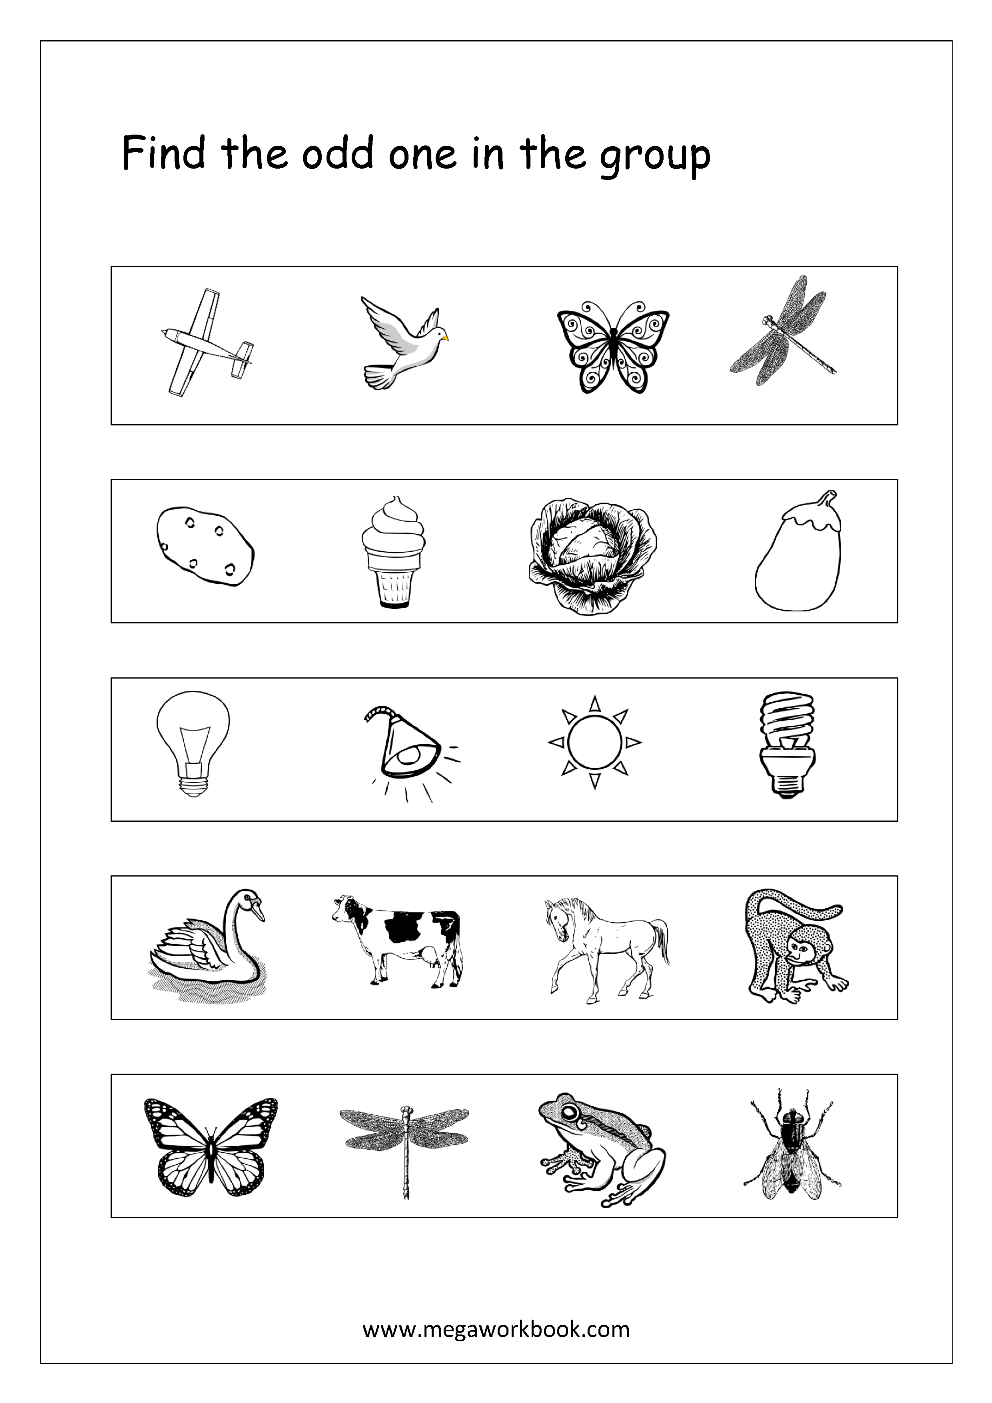 free-printable-odd-one-out-worksheets-logical-thinking-aptitude